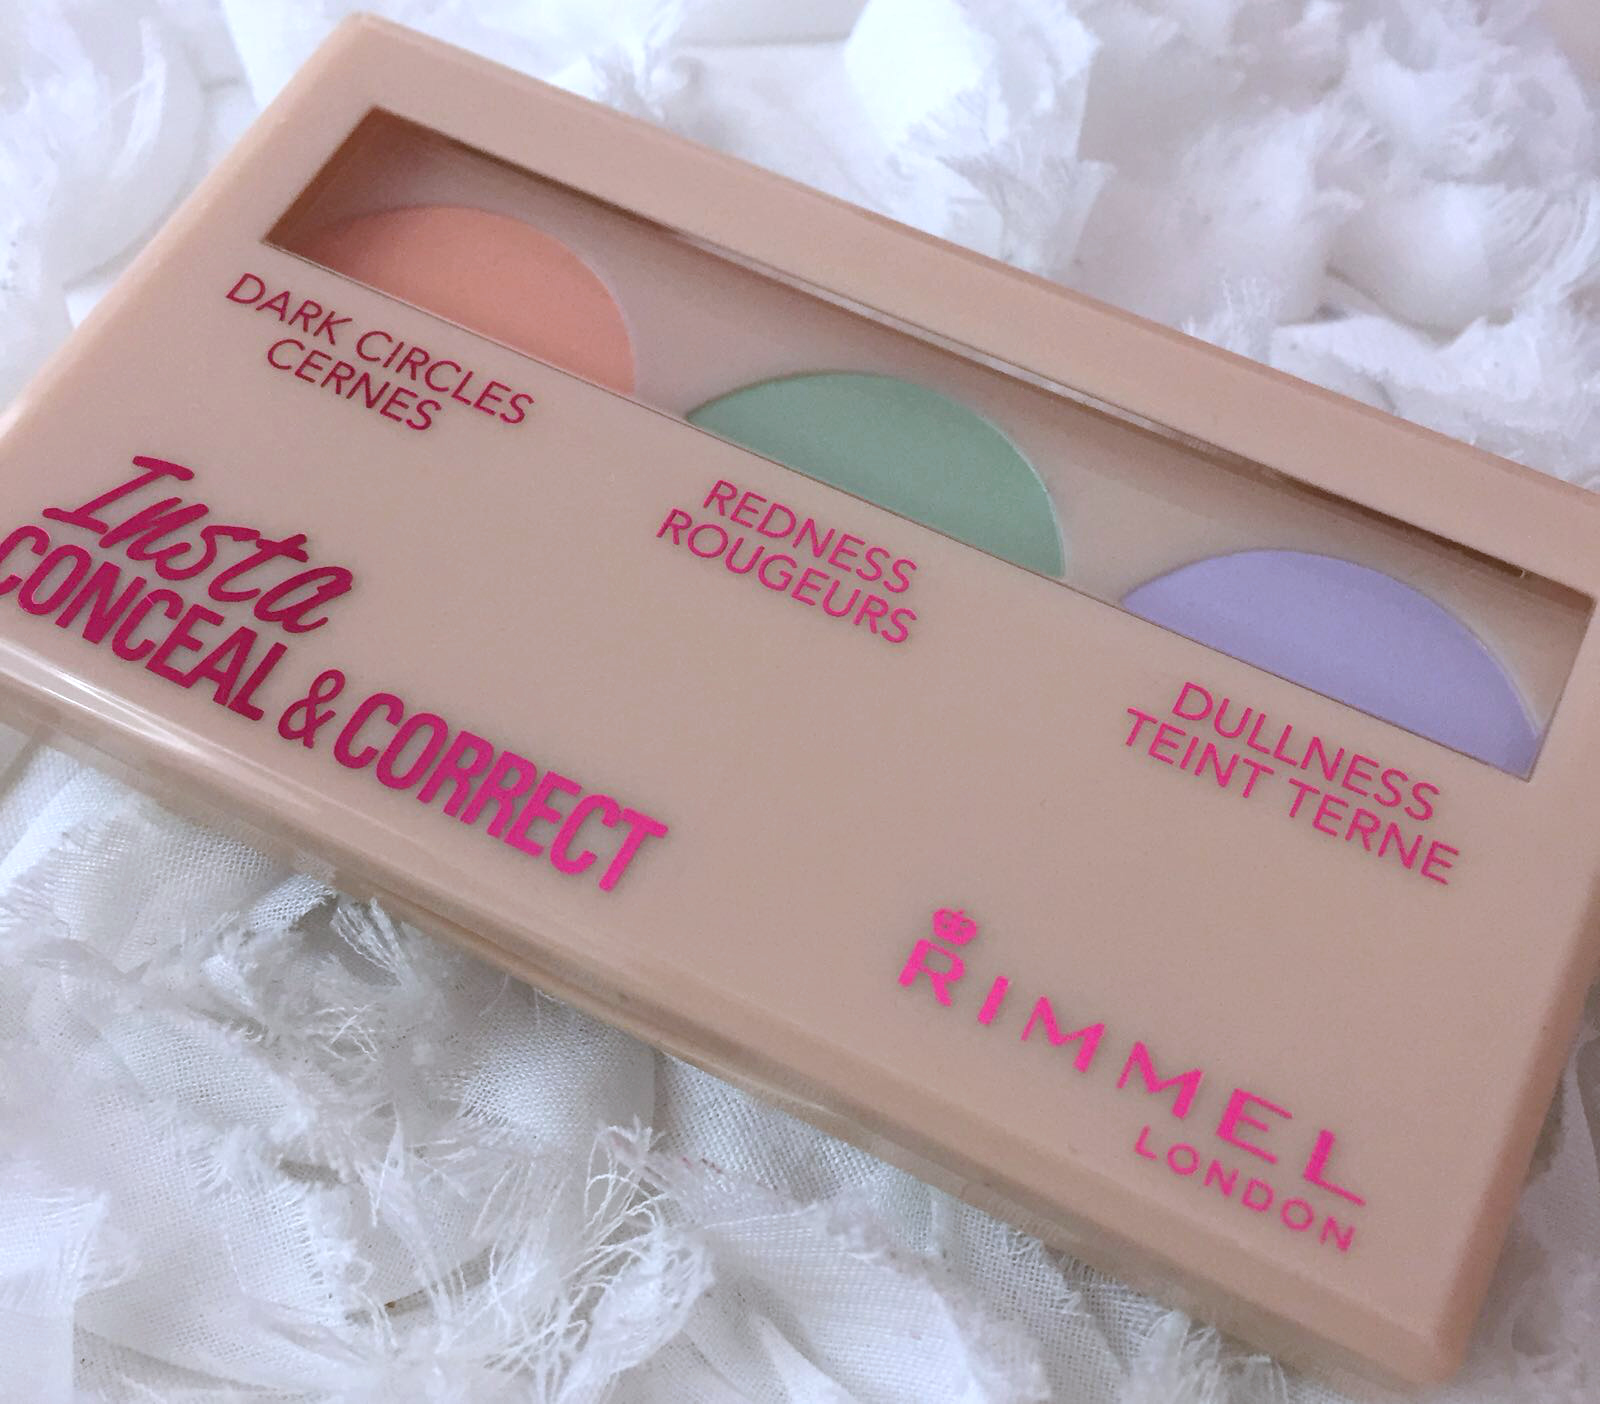 New Rimmel #Insta Makeup Collection - Review And Swatches Mammaful Zo: Beauty, Life, Plus Size Fashion & More